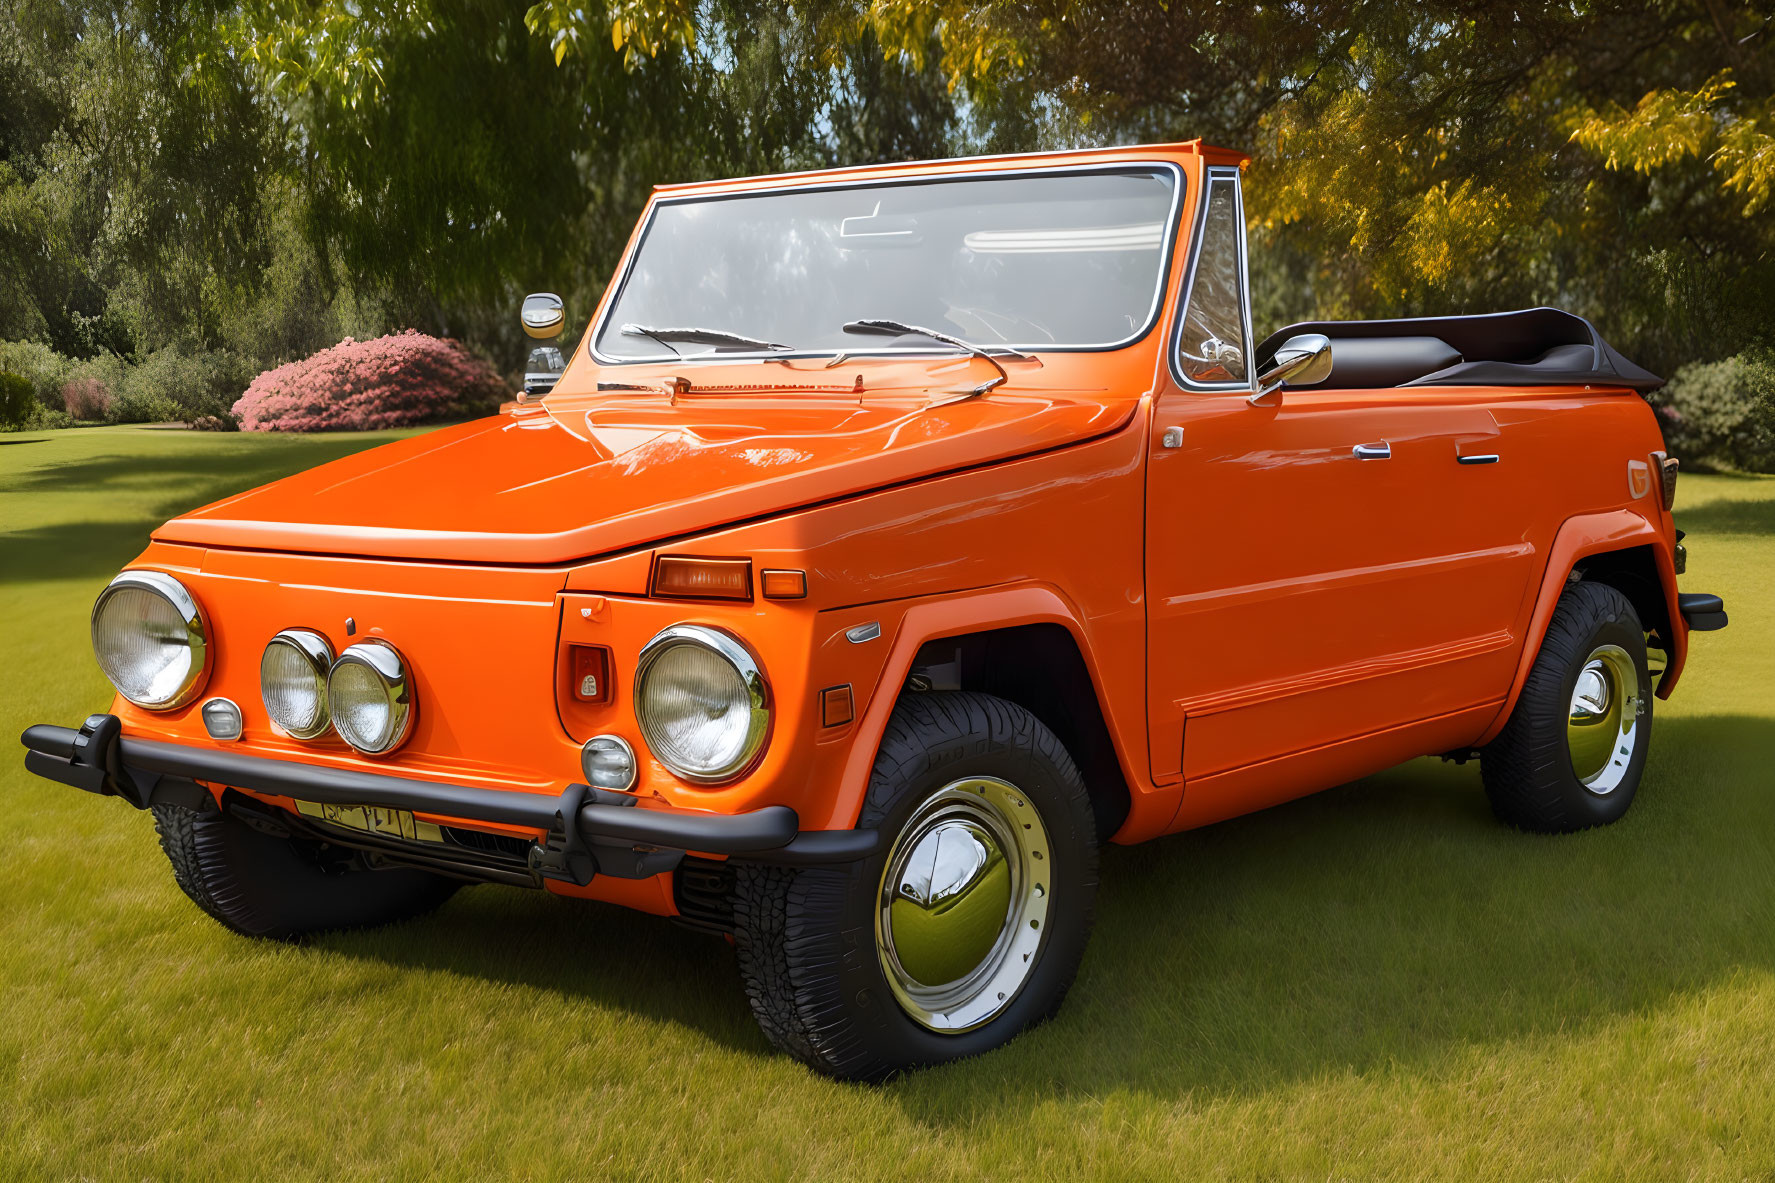 Classic Orange Convertible SUV with Chrome Accents Parked on Grass